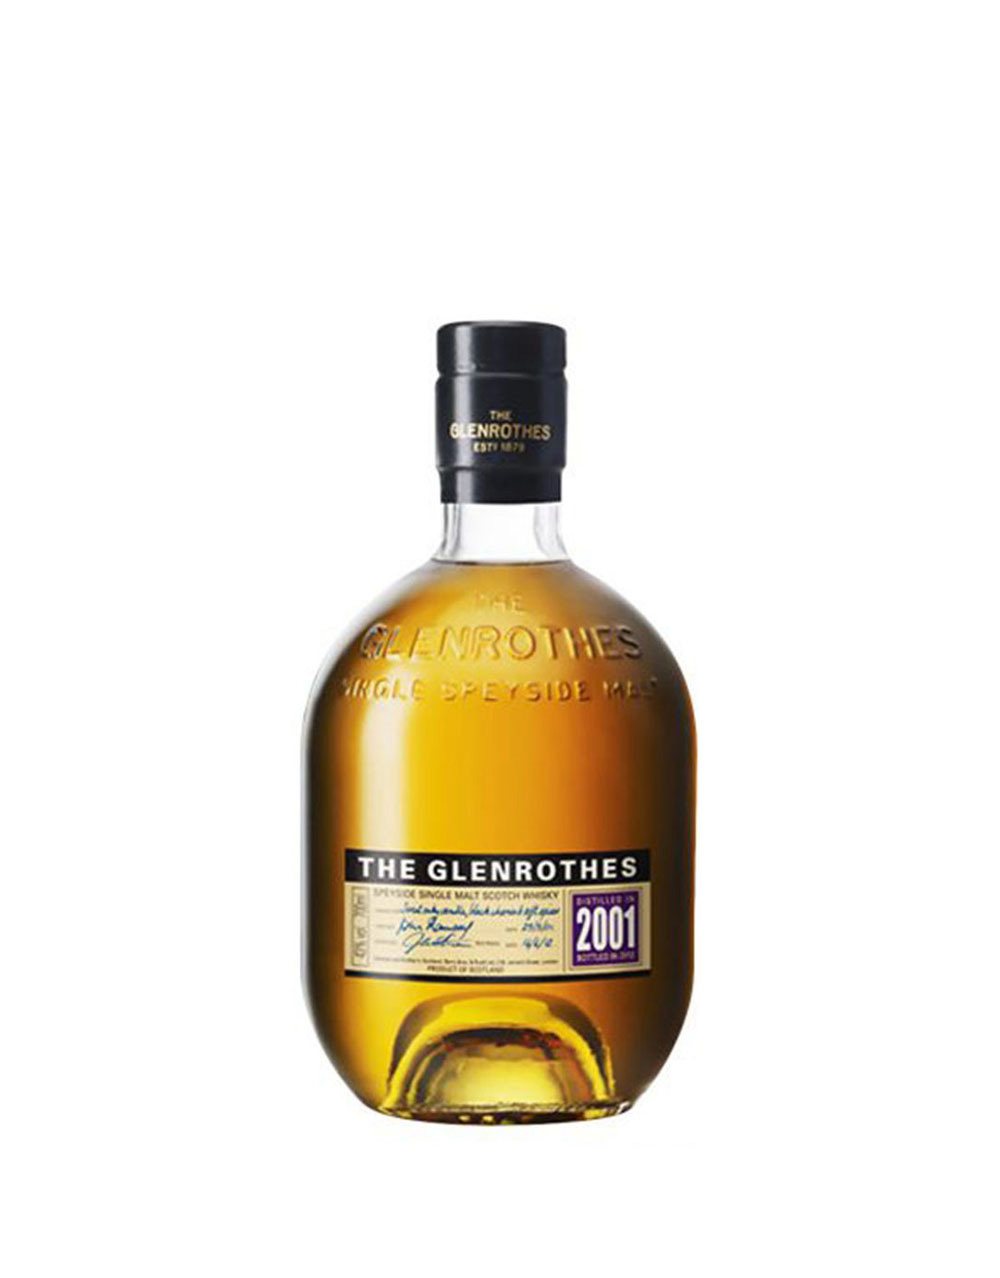 The Glenrothes 2001 Vintage